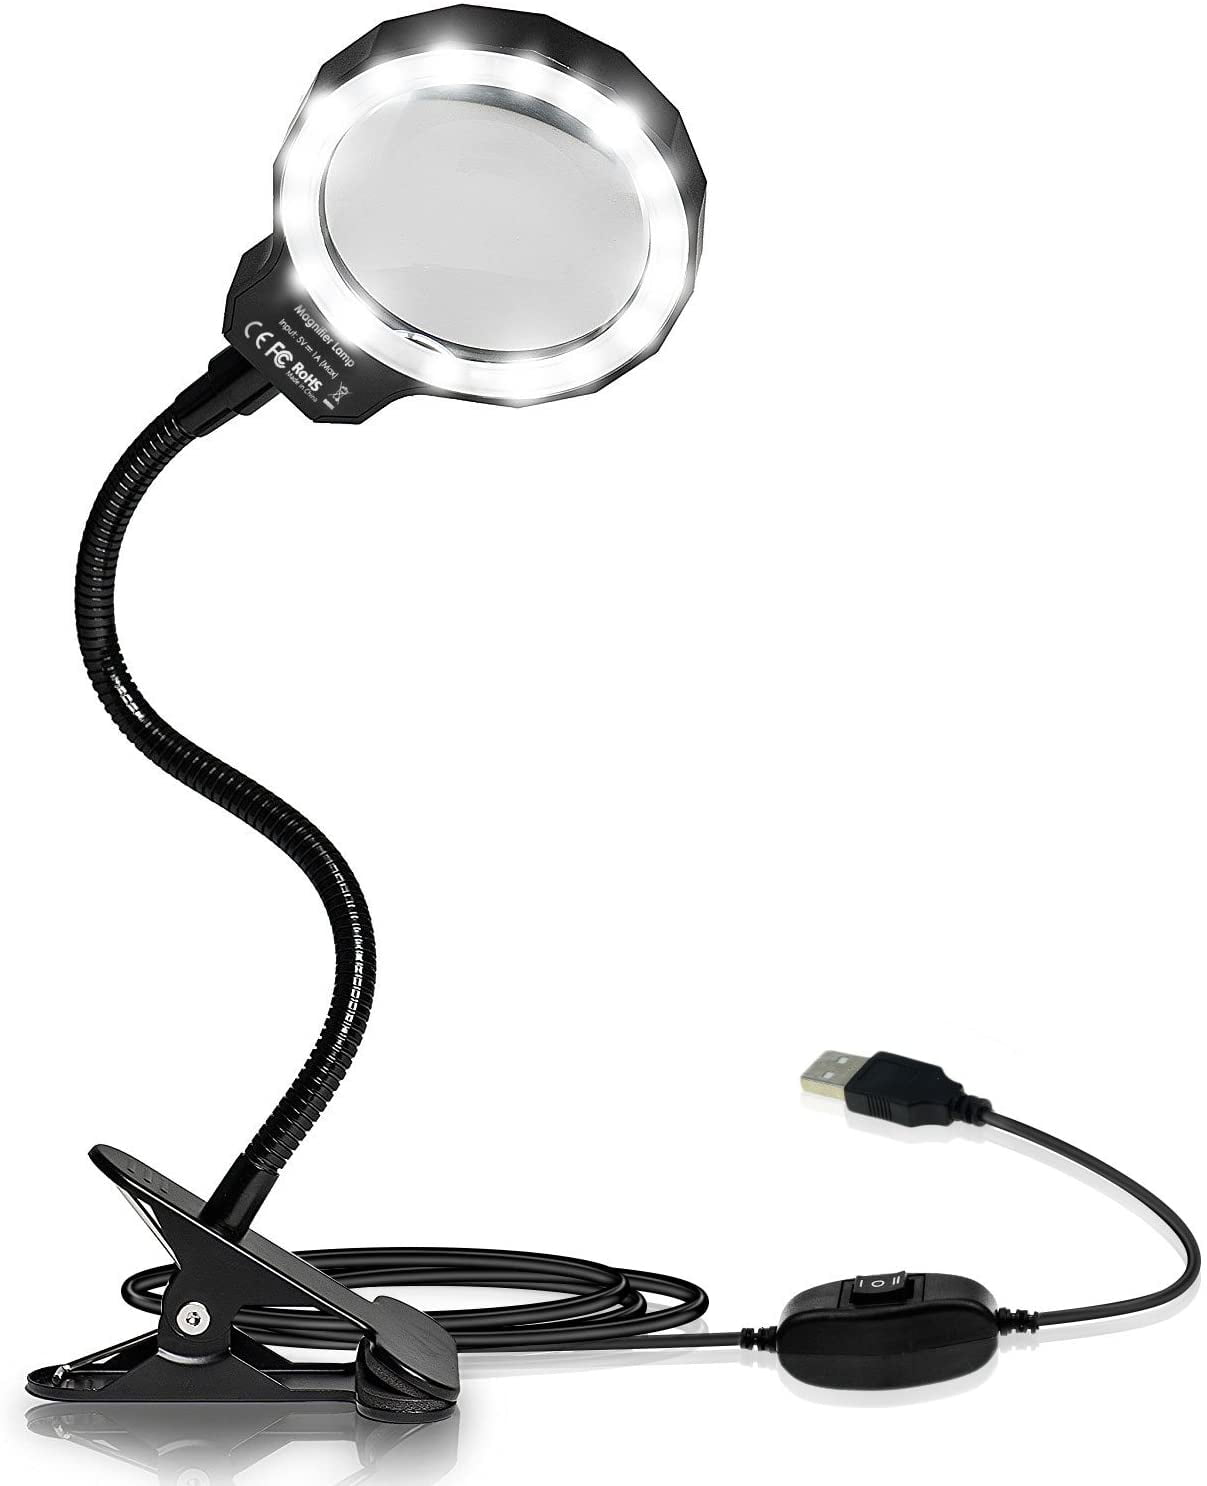 Tintec LED 3X Magnifying Lamp USB Powered Clip On 2 Magnifying Glass with Light 